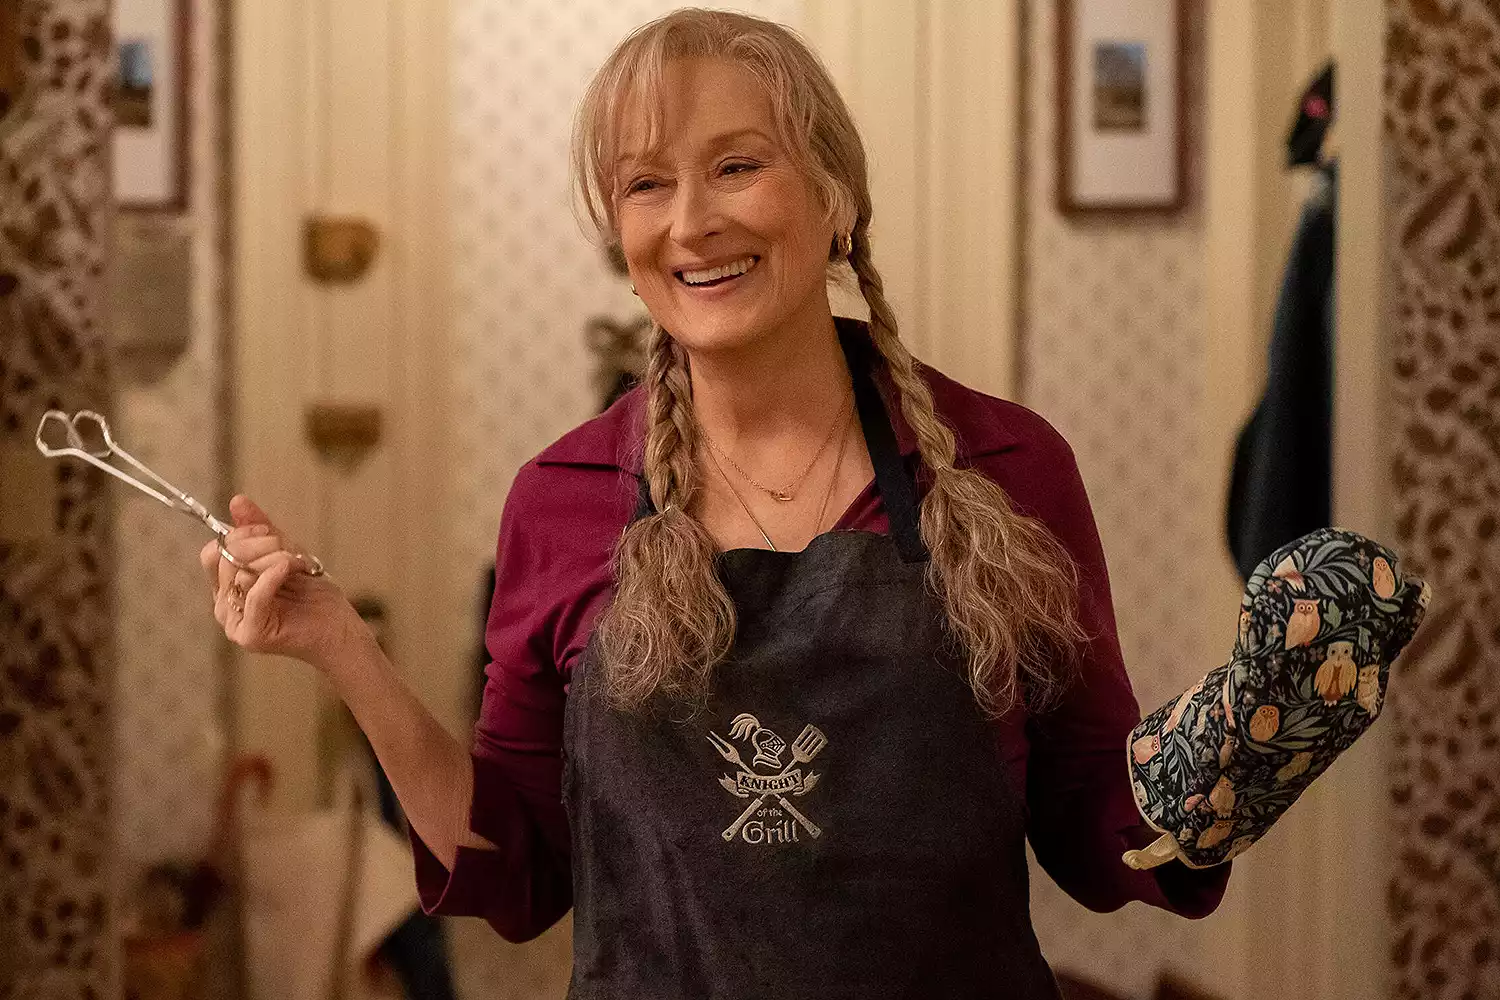 Only Murders in the Building Episode 305 -- Date night! Meryl Streep